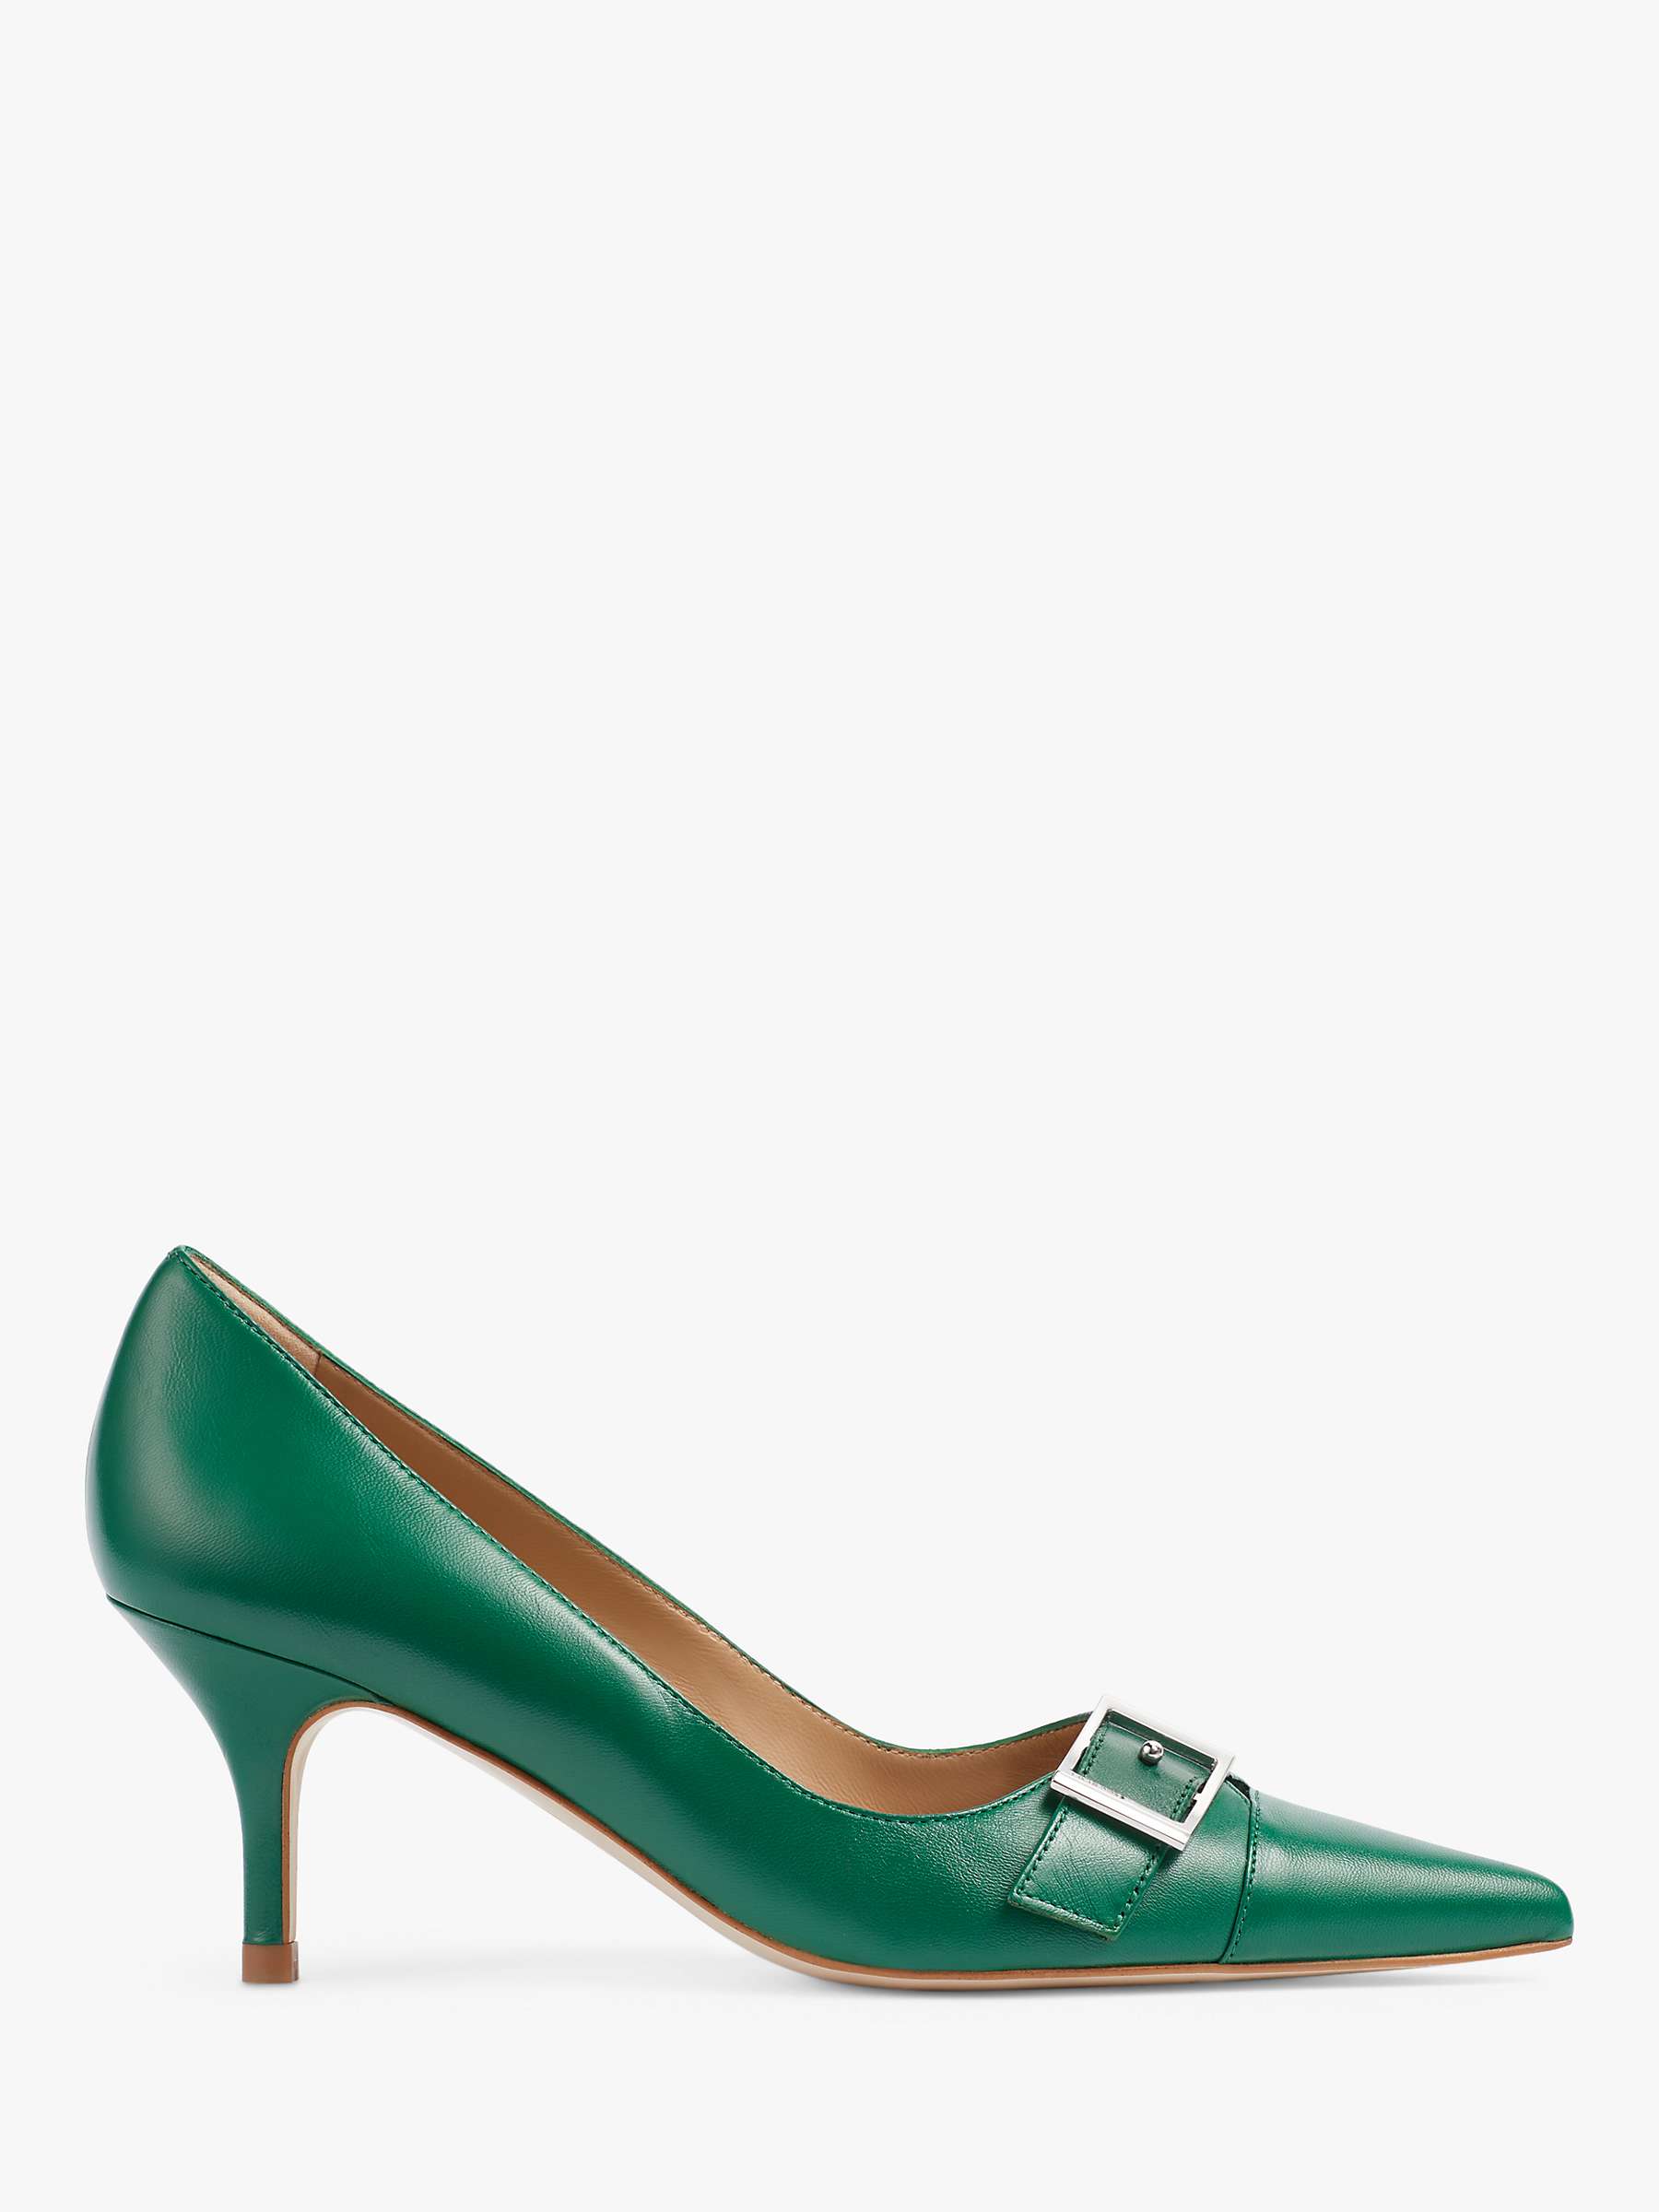 Buy L.K.Bennett Billie Nappa Leather Pointed Court Shoes Online at johnlewis.com